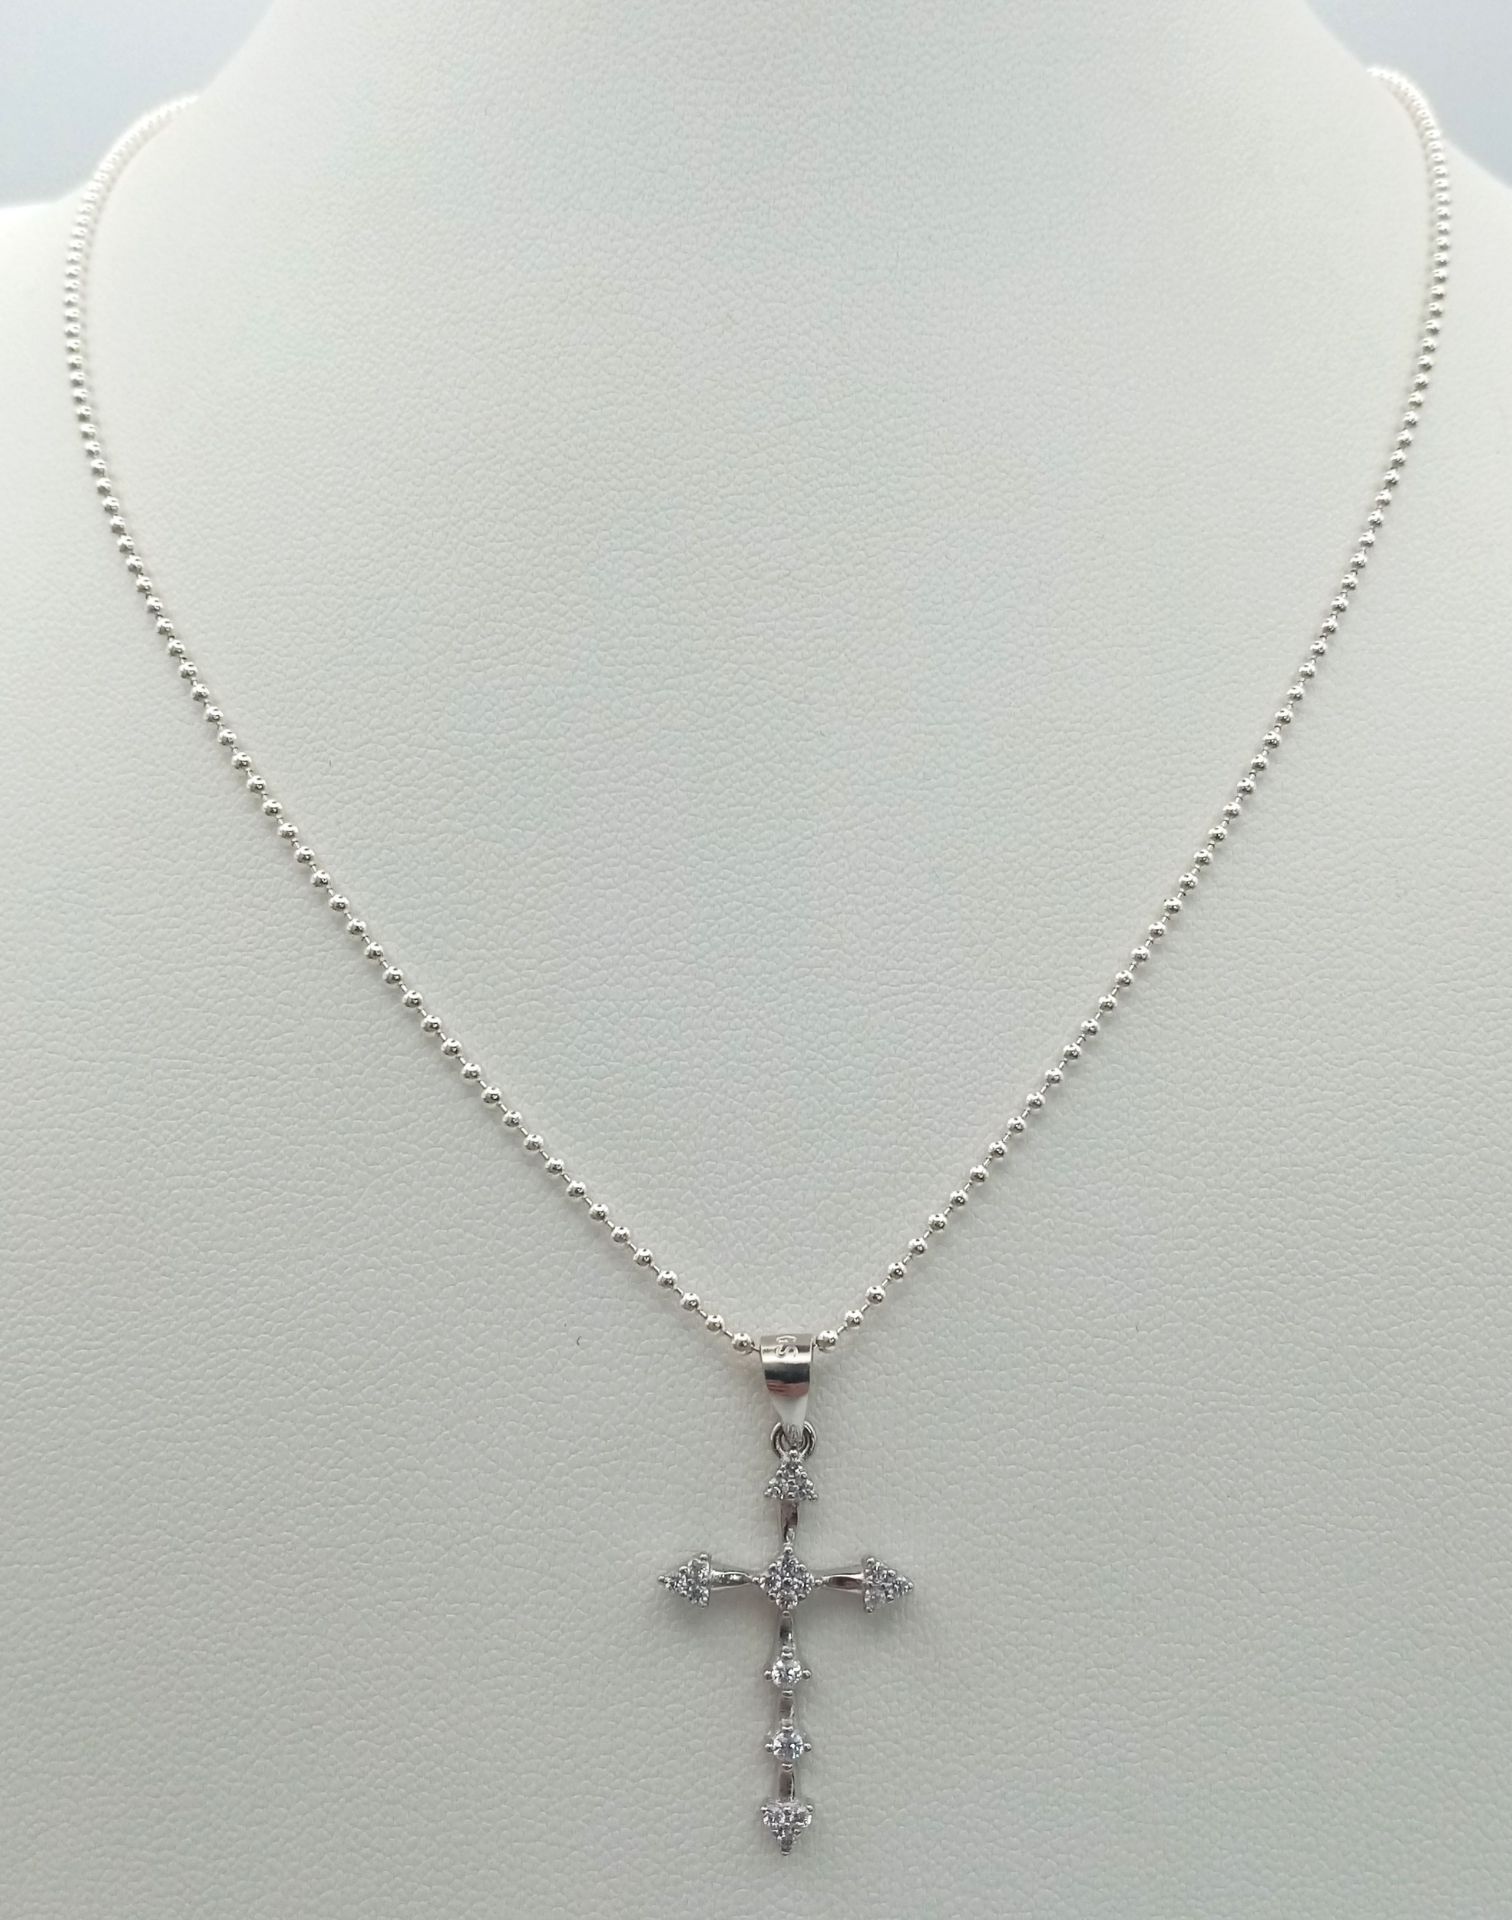 A 925 Silver Cross Pendant on a 925 Silver Chain. 3cm and 40cm. - Image 2 of 5